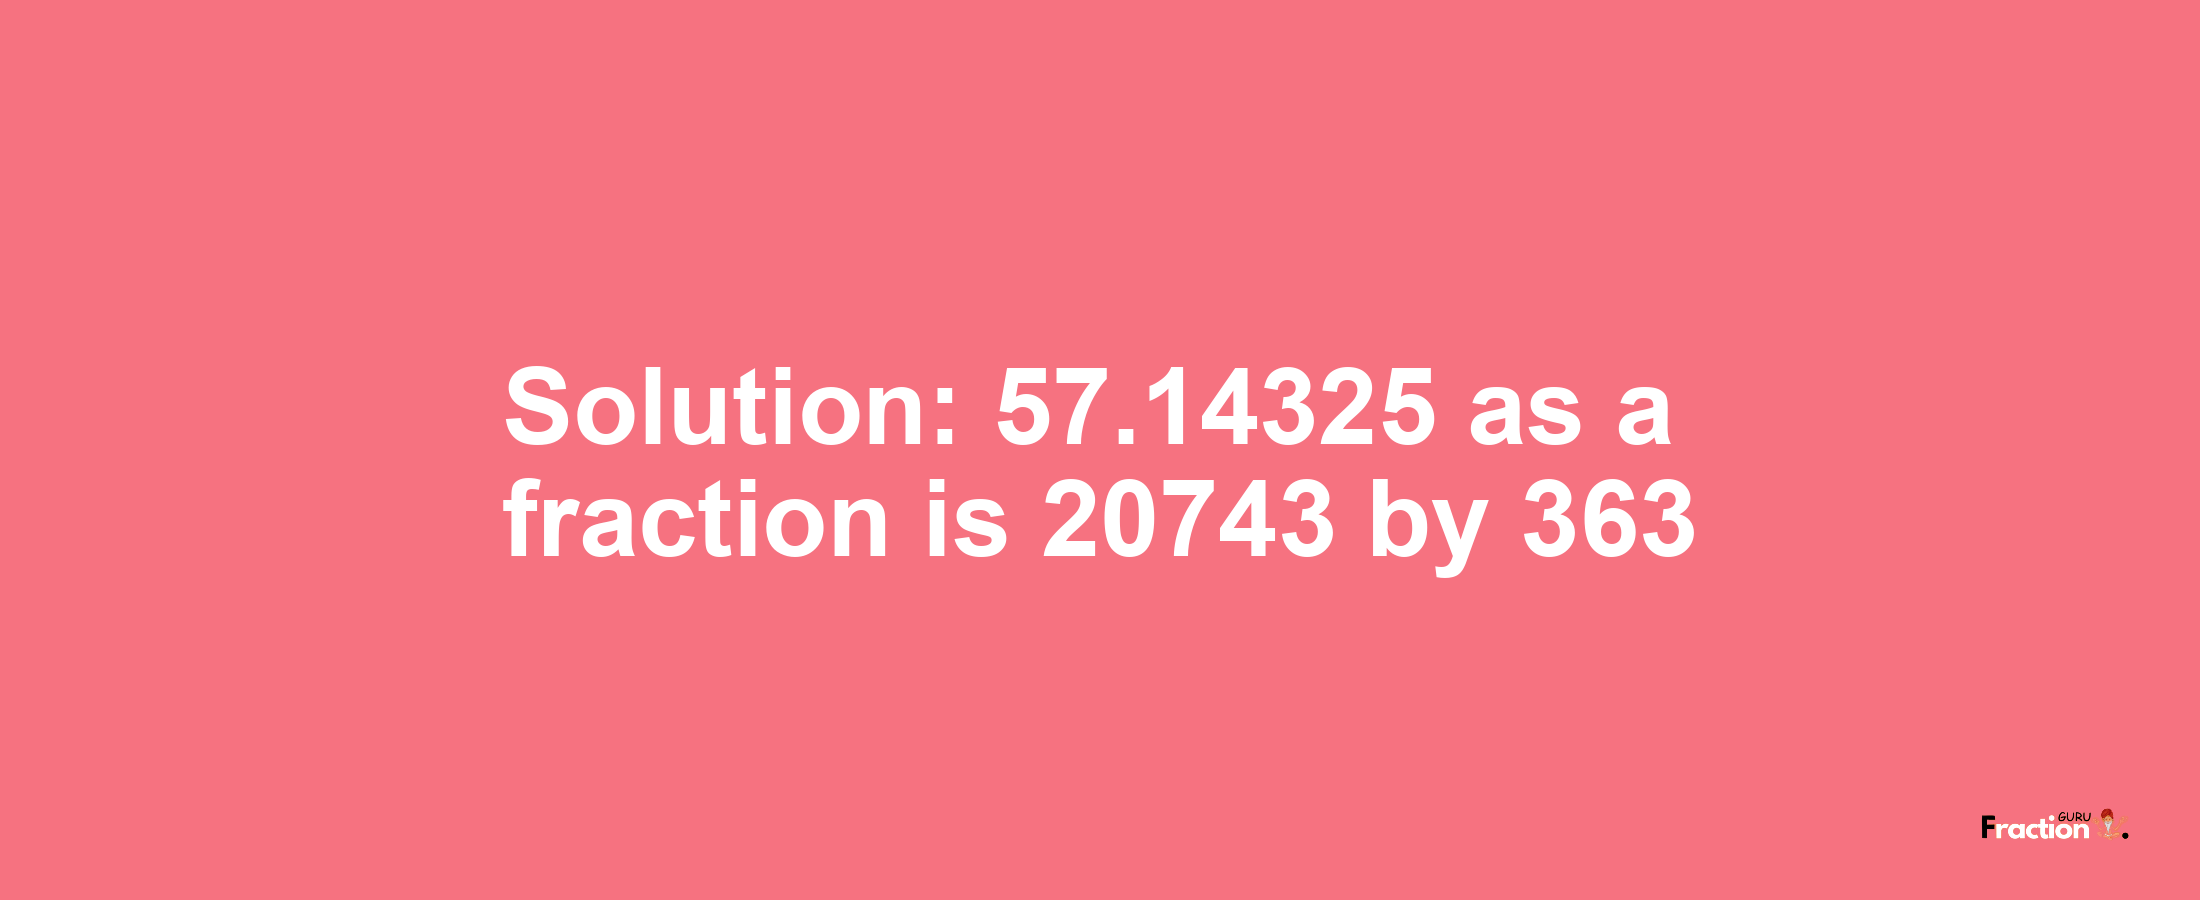 Solution:57.14325 as a fraction is 20743/363